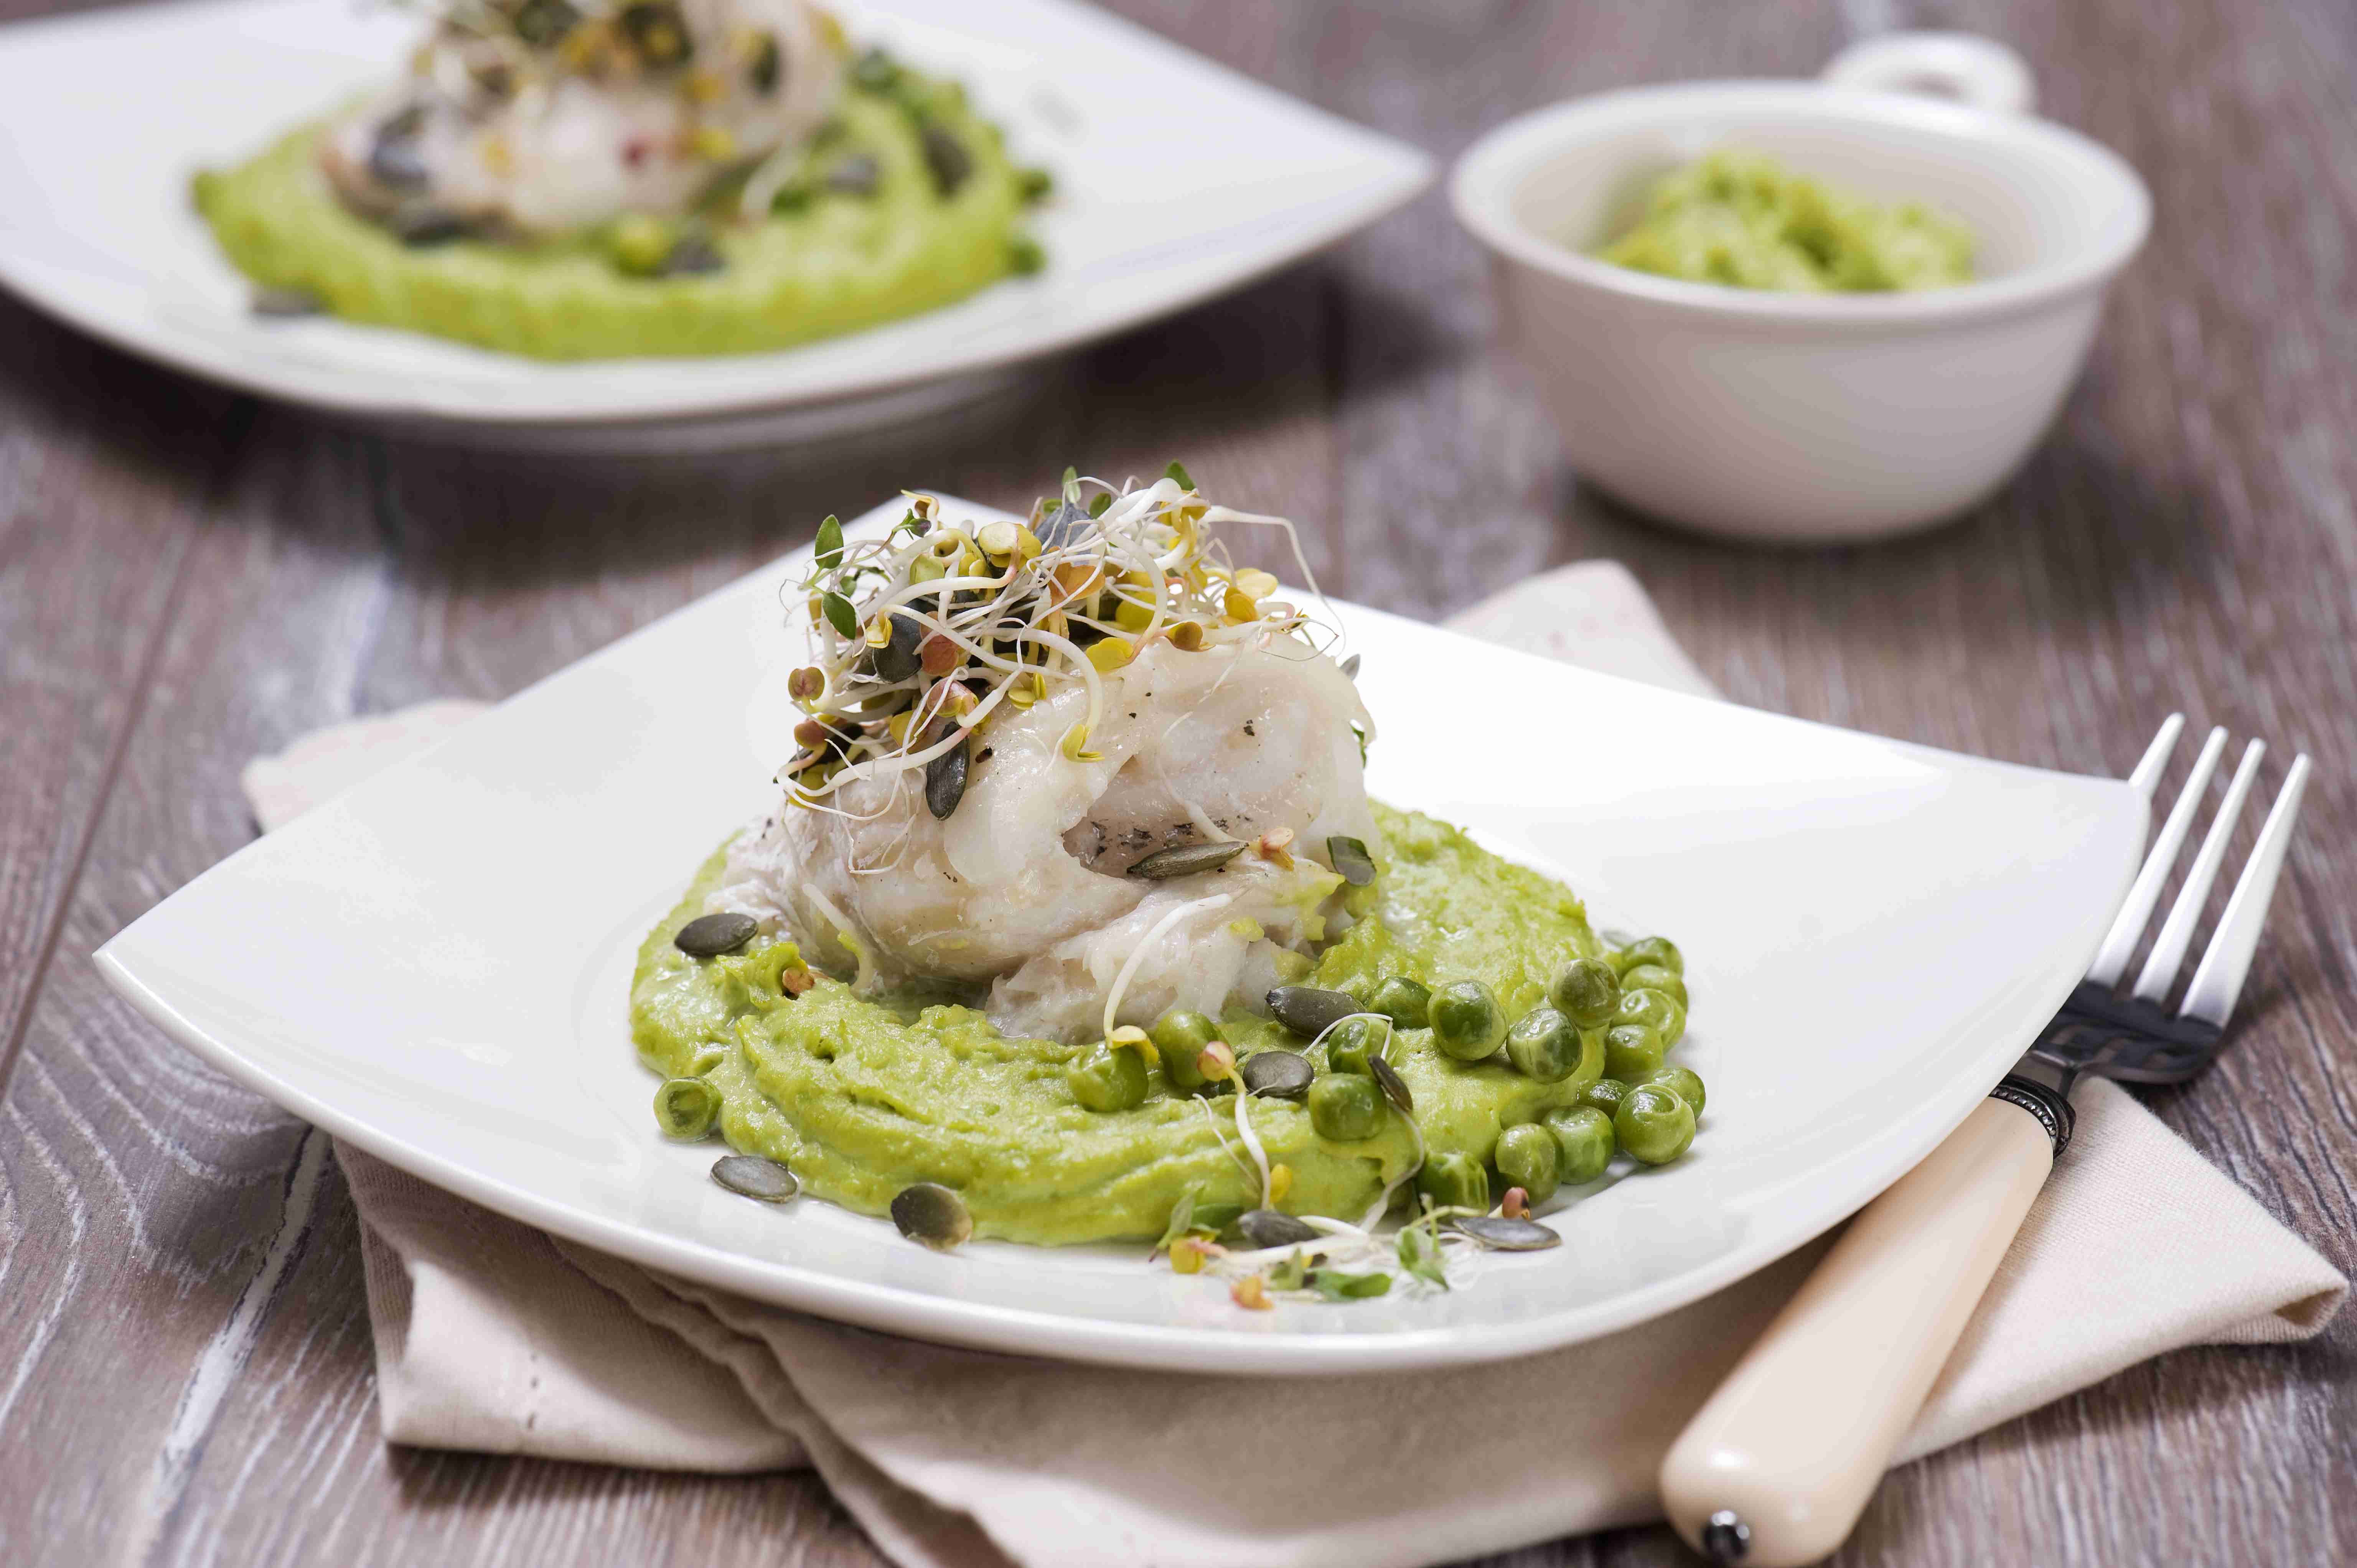 Baked cod served with peas puree